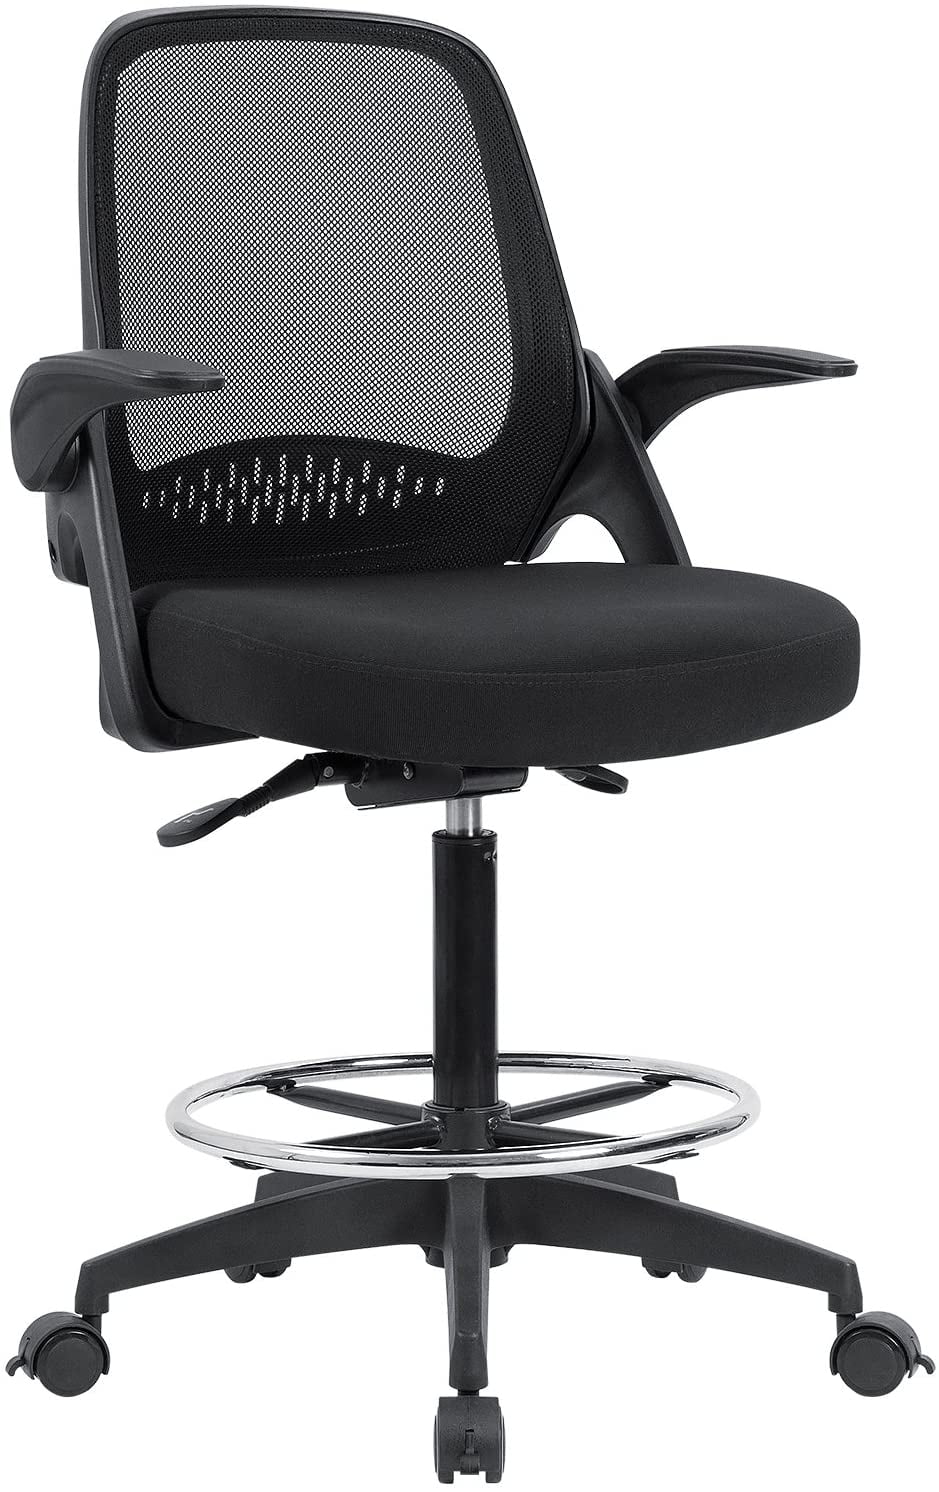 Walnew Office Drafting Chair Tall Office Chair with Flip